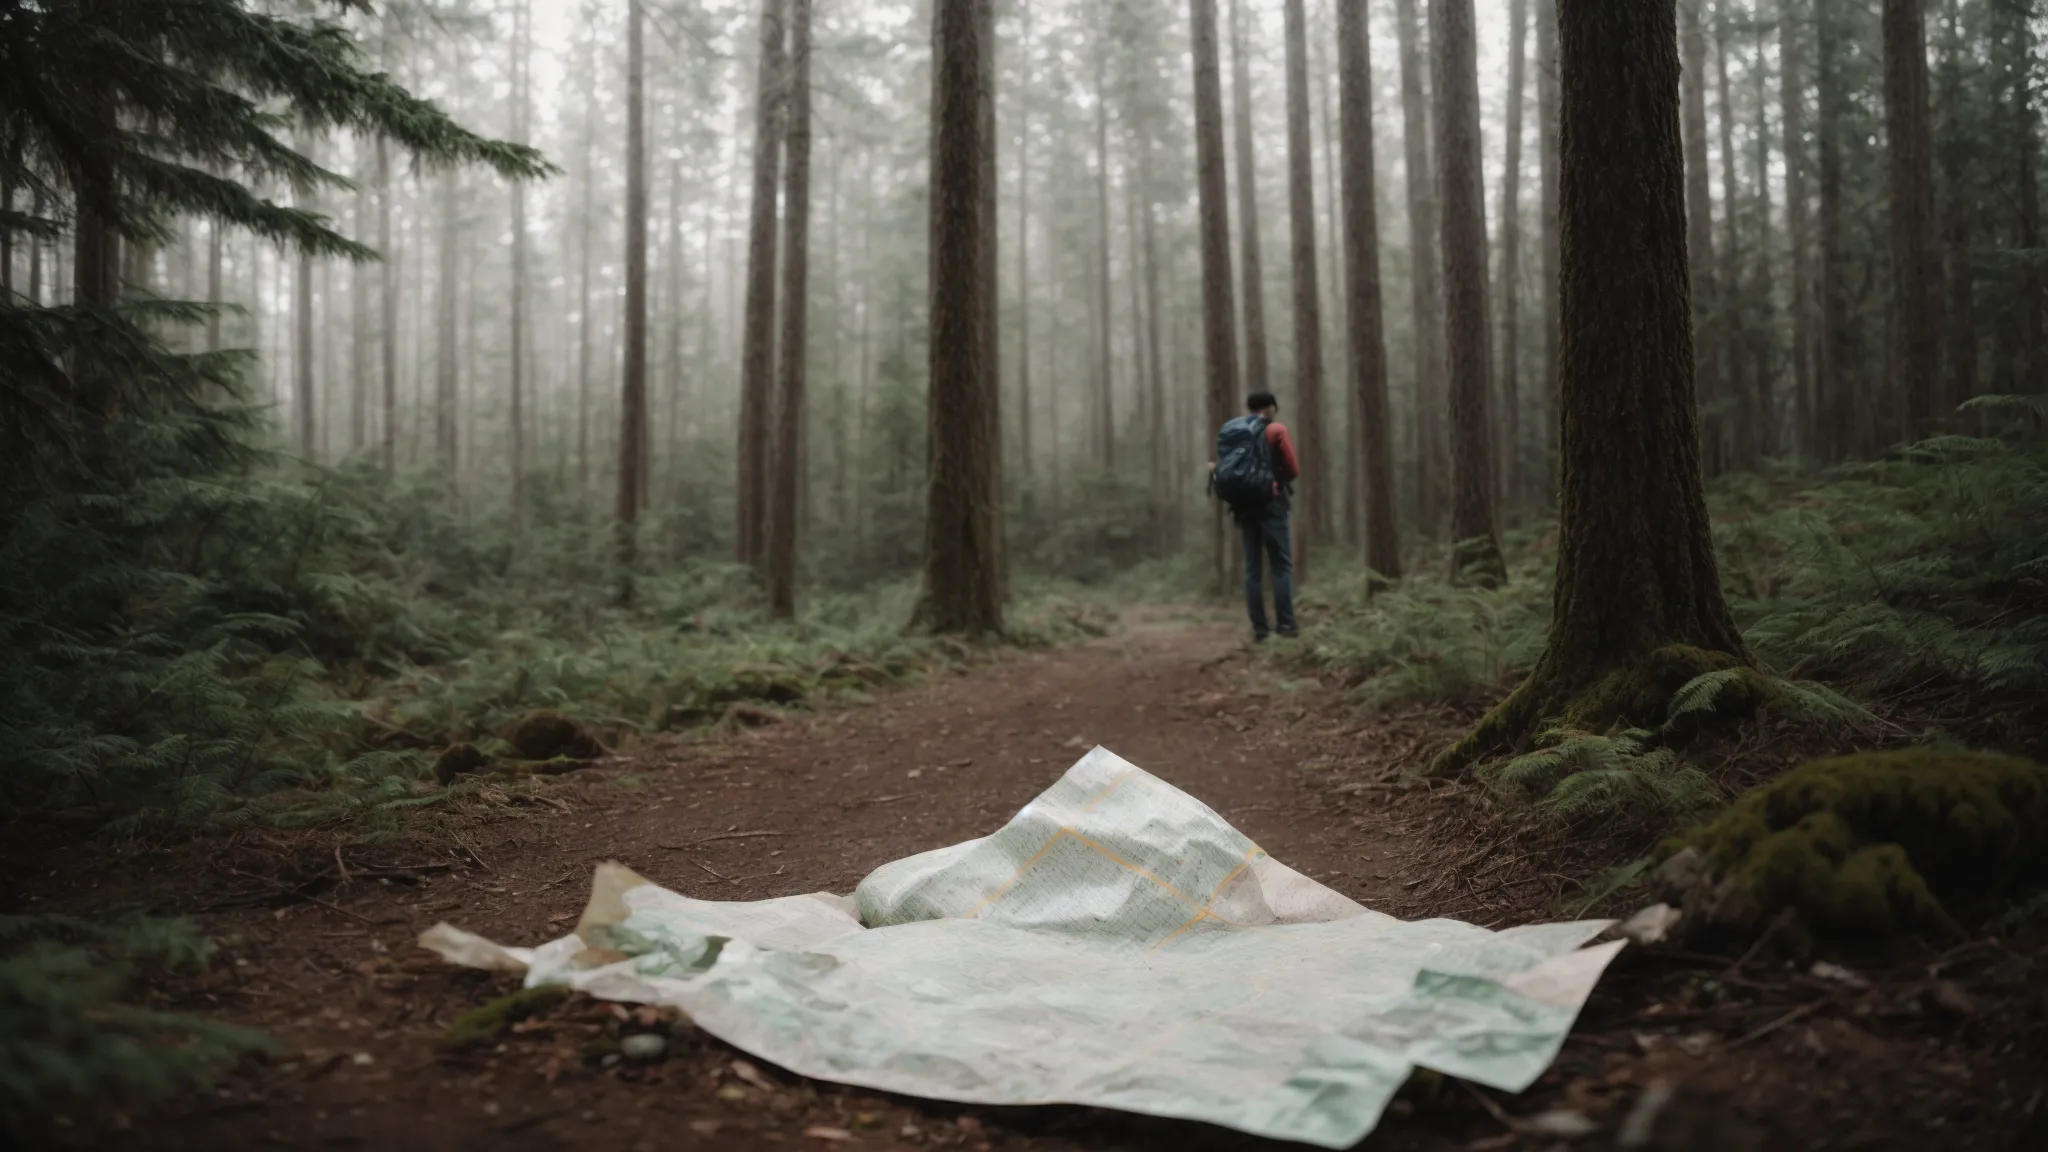 a traveler stands at a crossroads in a forest, looking down at a crumpled, discarded map on the ground.